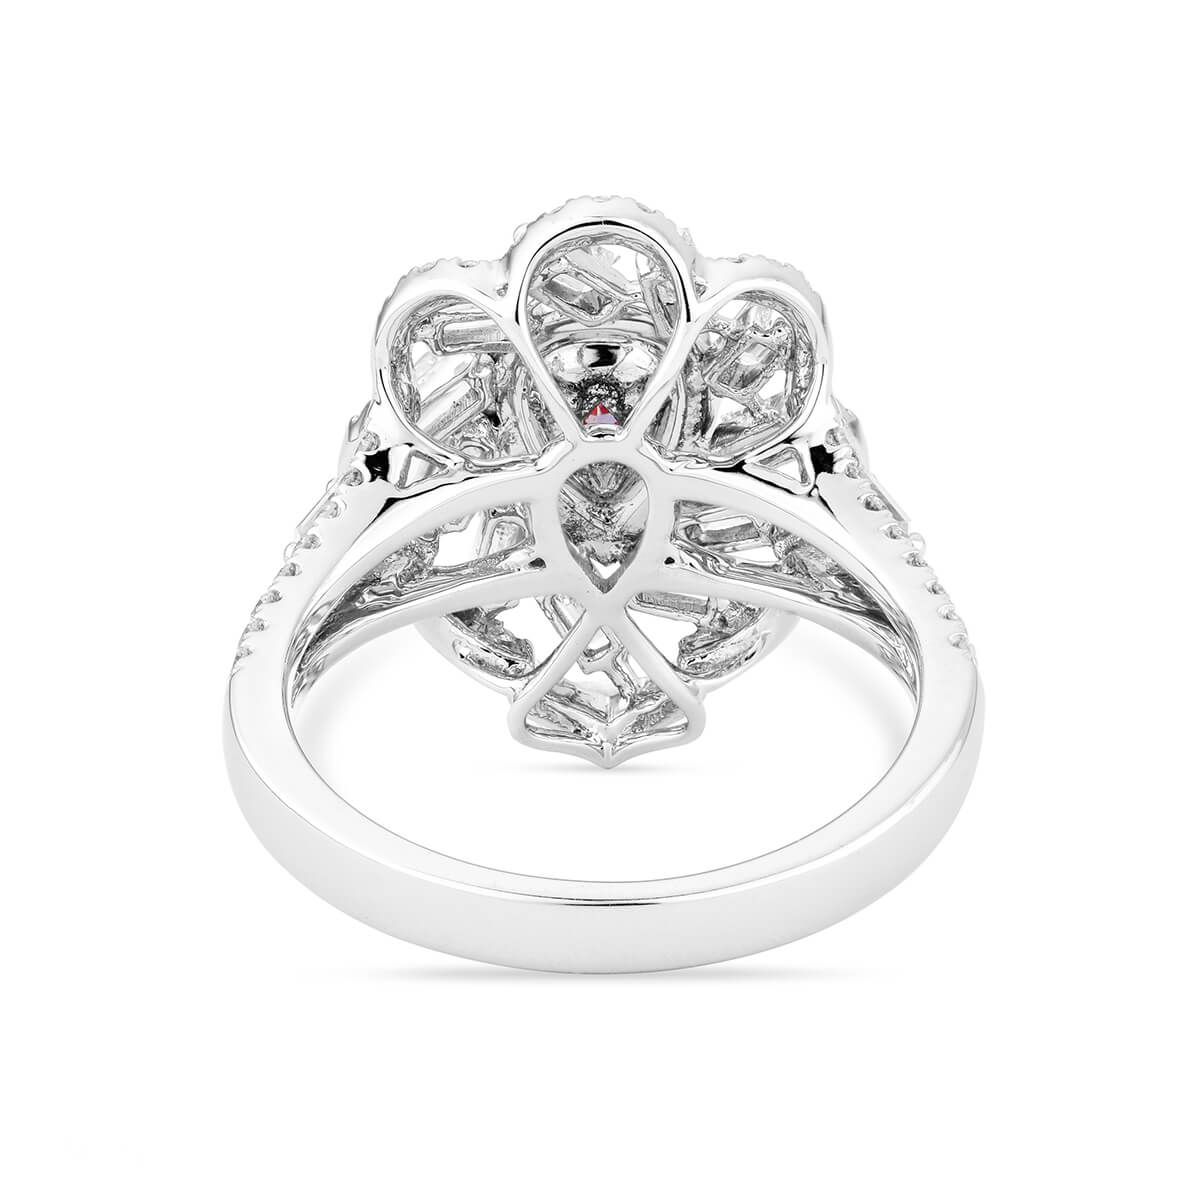 Very Light Pink Diamond Ring, 0.45 Ct. (1.40 Ct. TW), Pear shape, GIA Certified, 5191307870